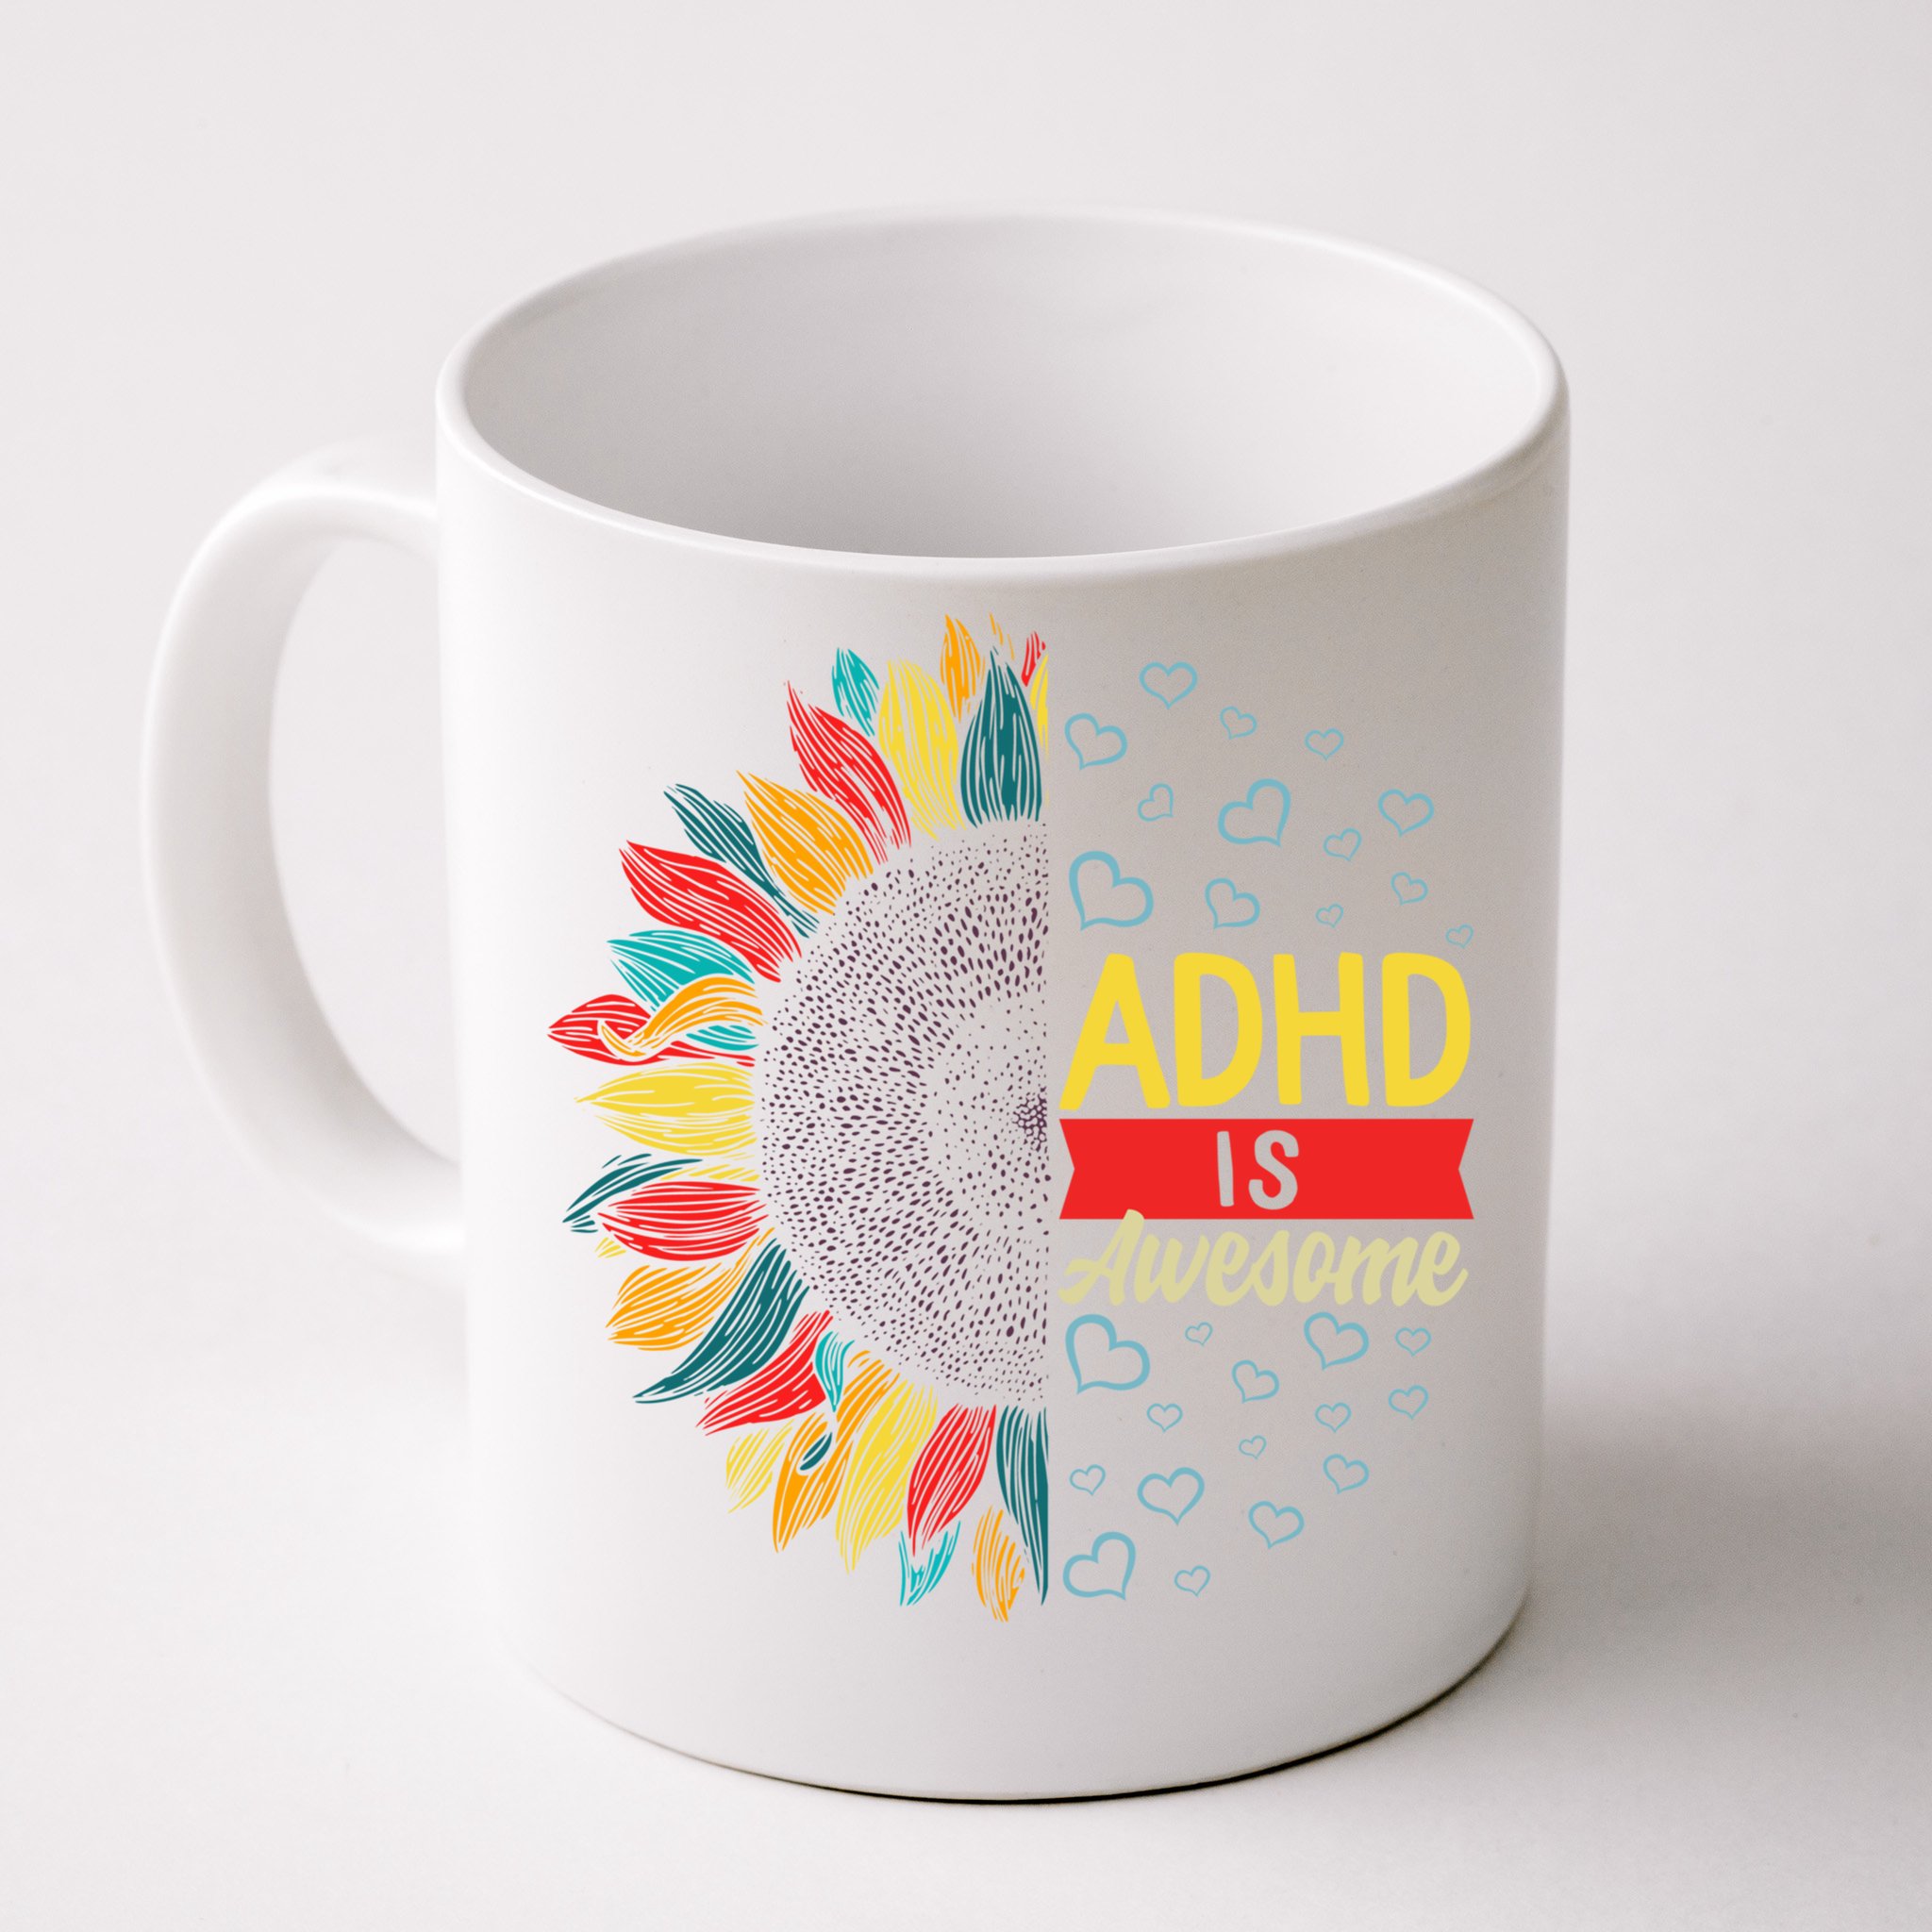 https://images3.teeshirtpalace.com/images/productImages/aia6873693-adhd-is-awesome-tal-health-neurodiversity-adhd-awareness-meaningful-gift--white-cfm-front.jpg